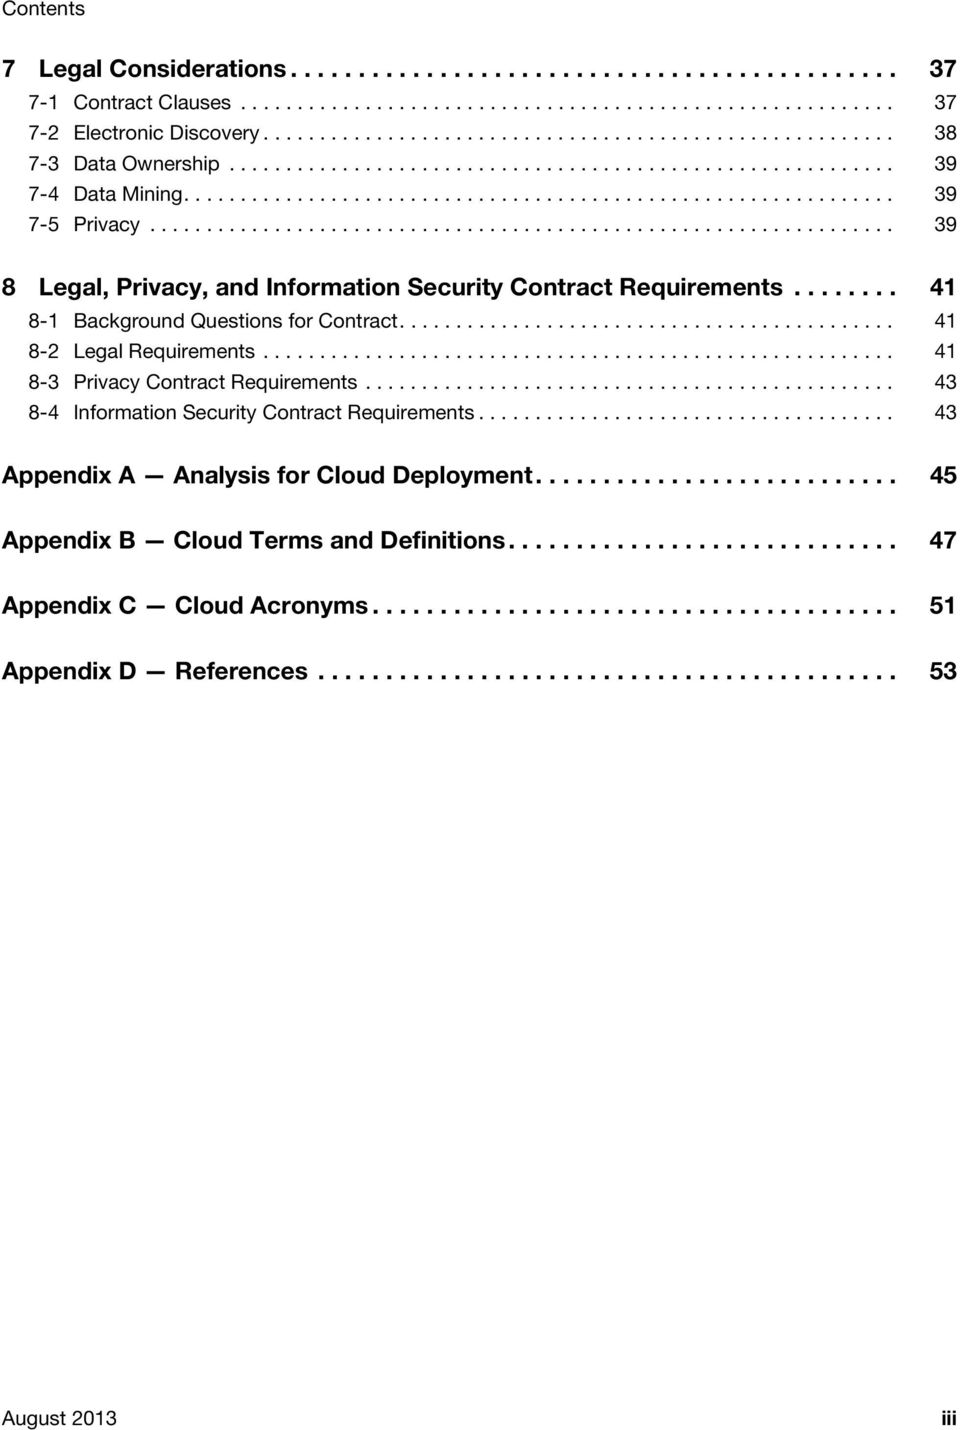 ................................................................. 39 8 Legal, Privacy, and Information Security Contract Requirements........ 41 8-1 Background Questions for Contract.